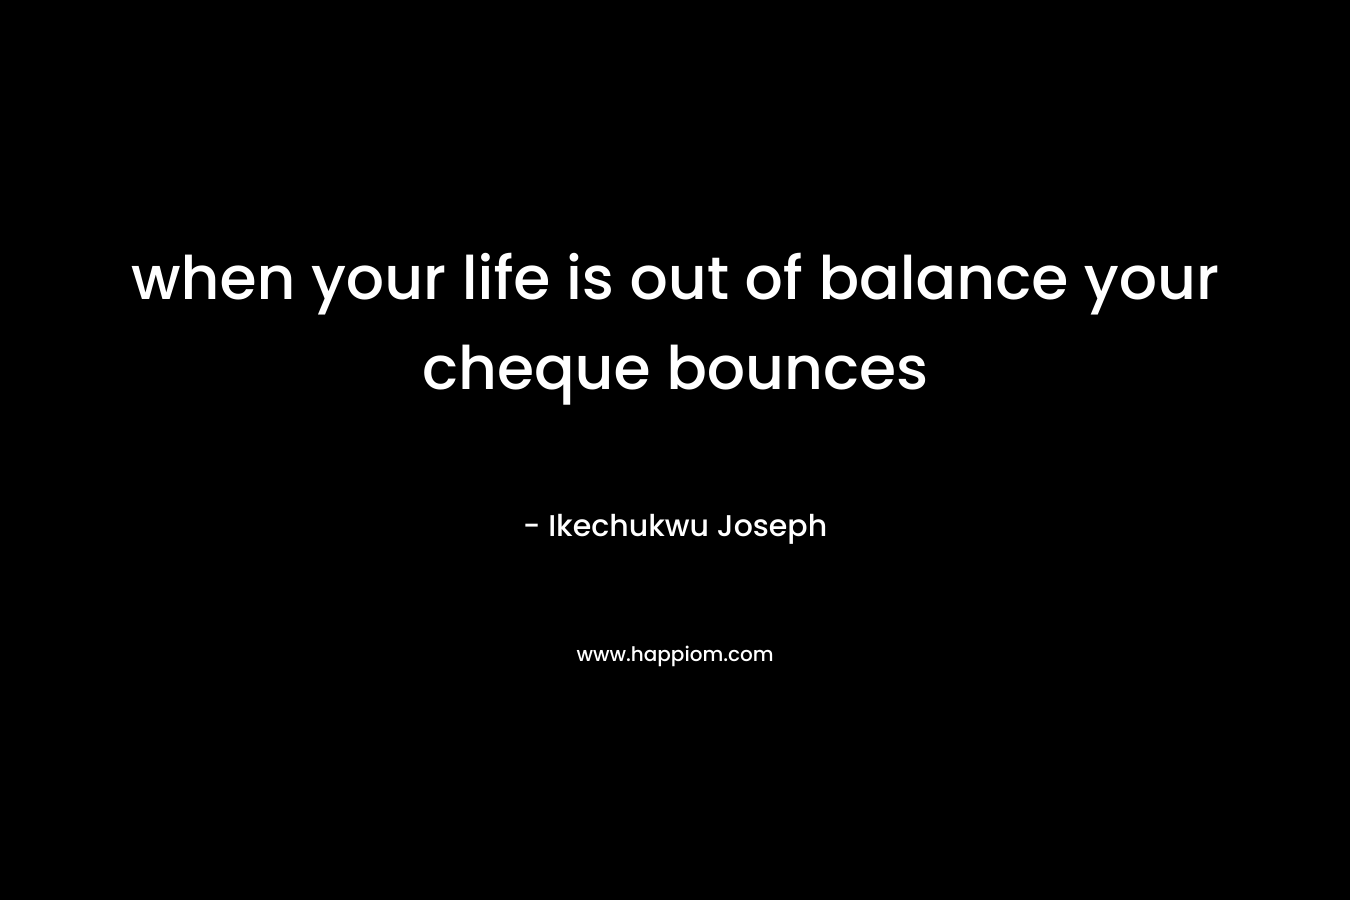 when your life is out of balance your cheque bounces